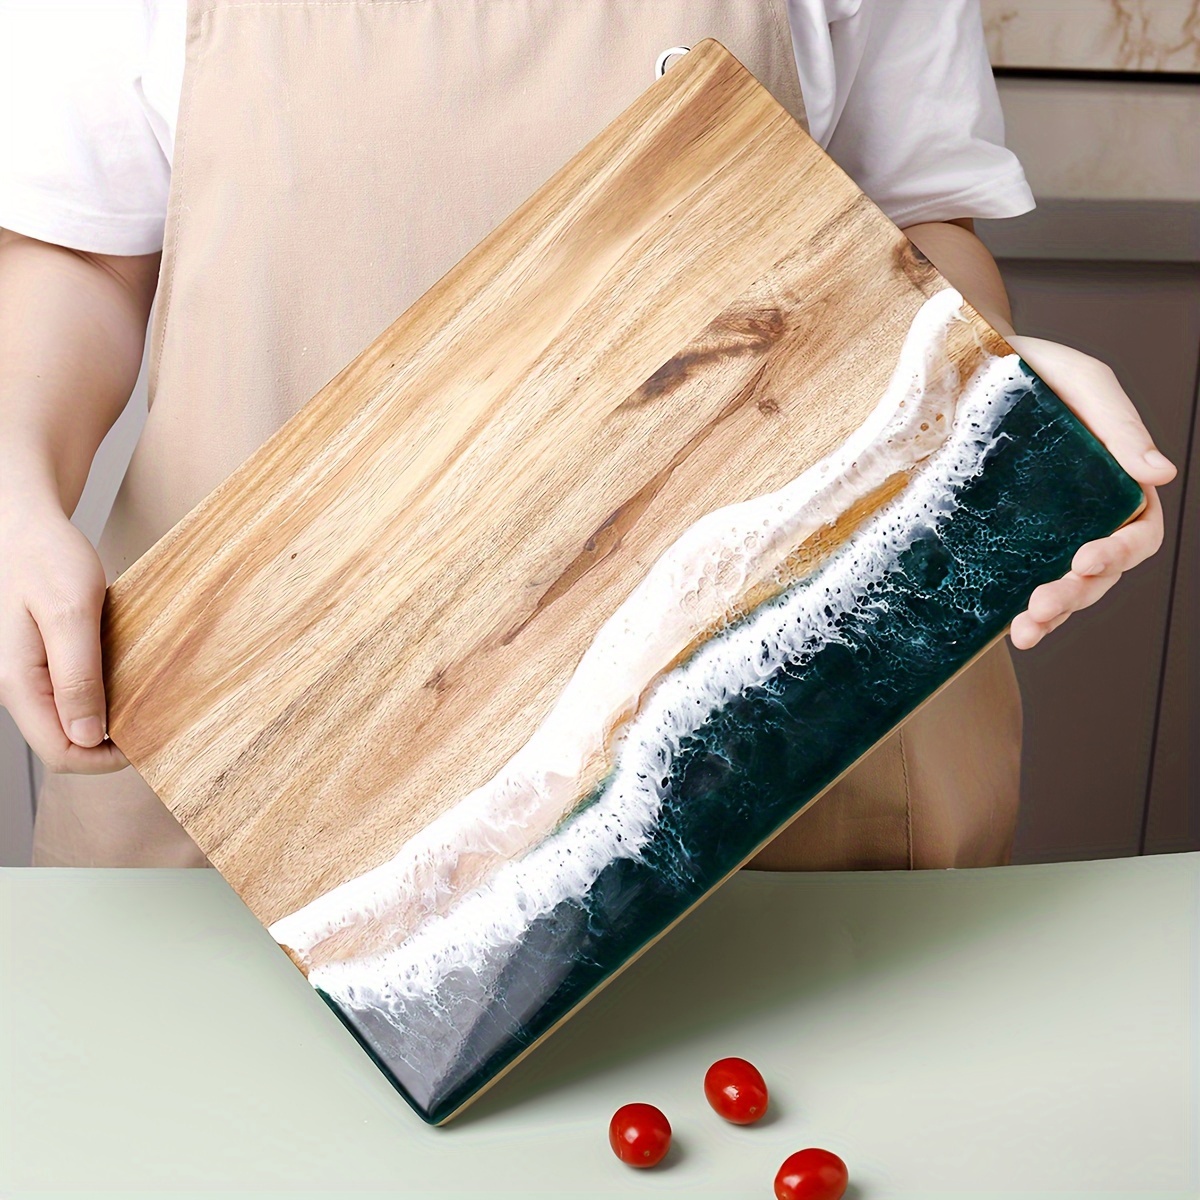 

Wave Resin Acacia Wood Cutting Board - 1pc Creative Wooden Chopping Board For Home Use - Food Contact Safe, Multipurpose Fruit And Vegetable Slicing Board With Unique Wave Design